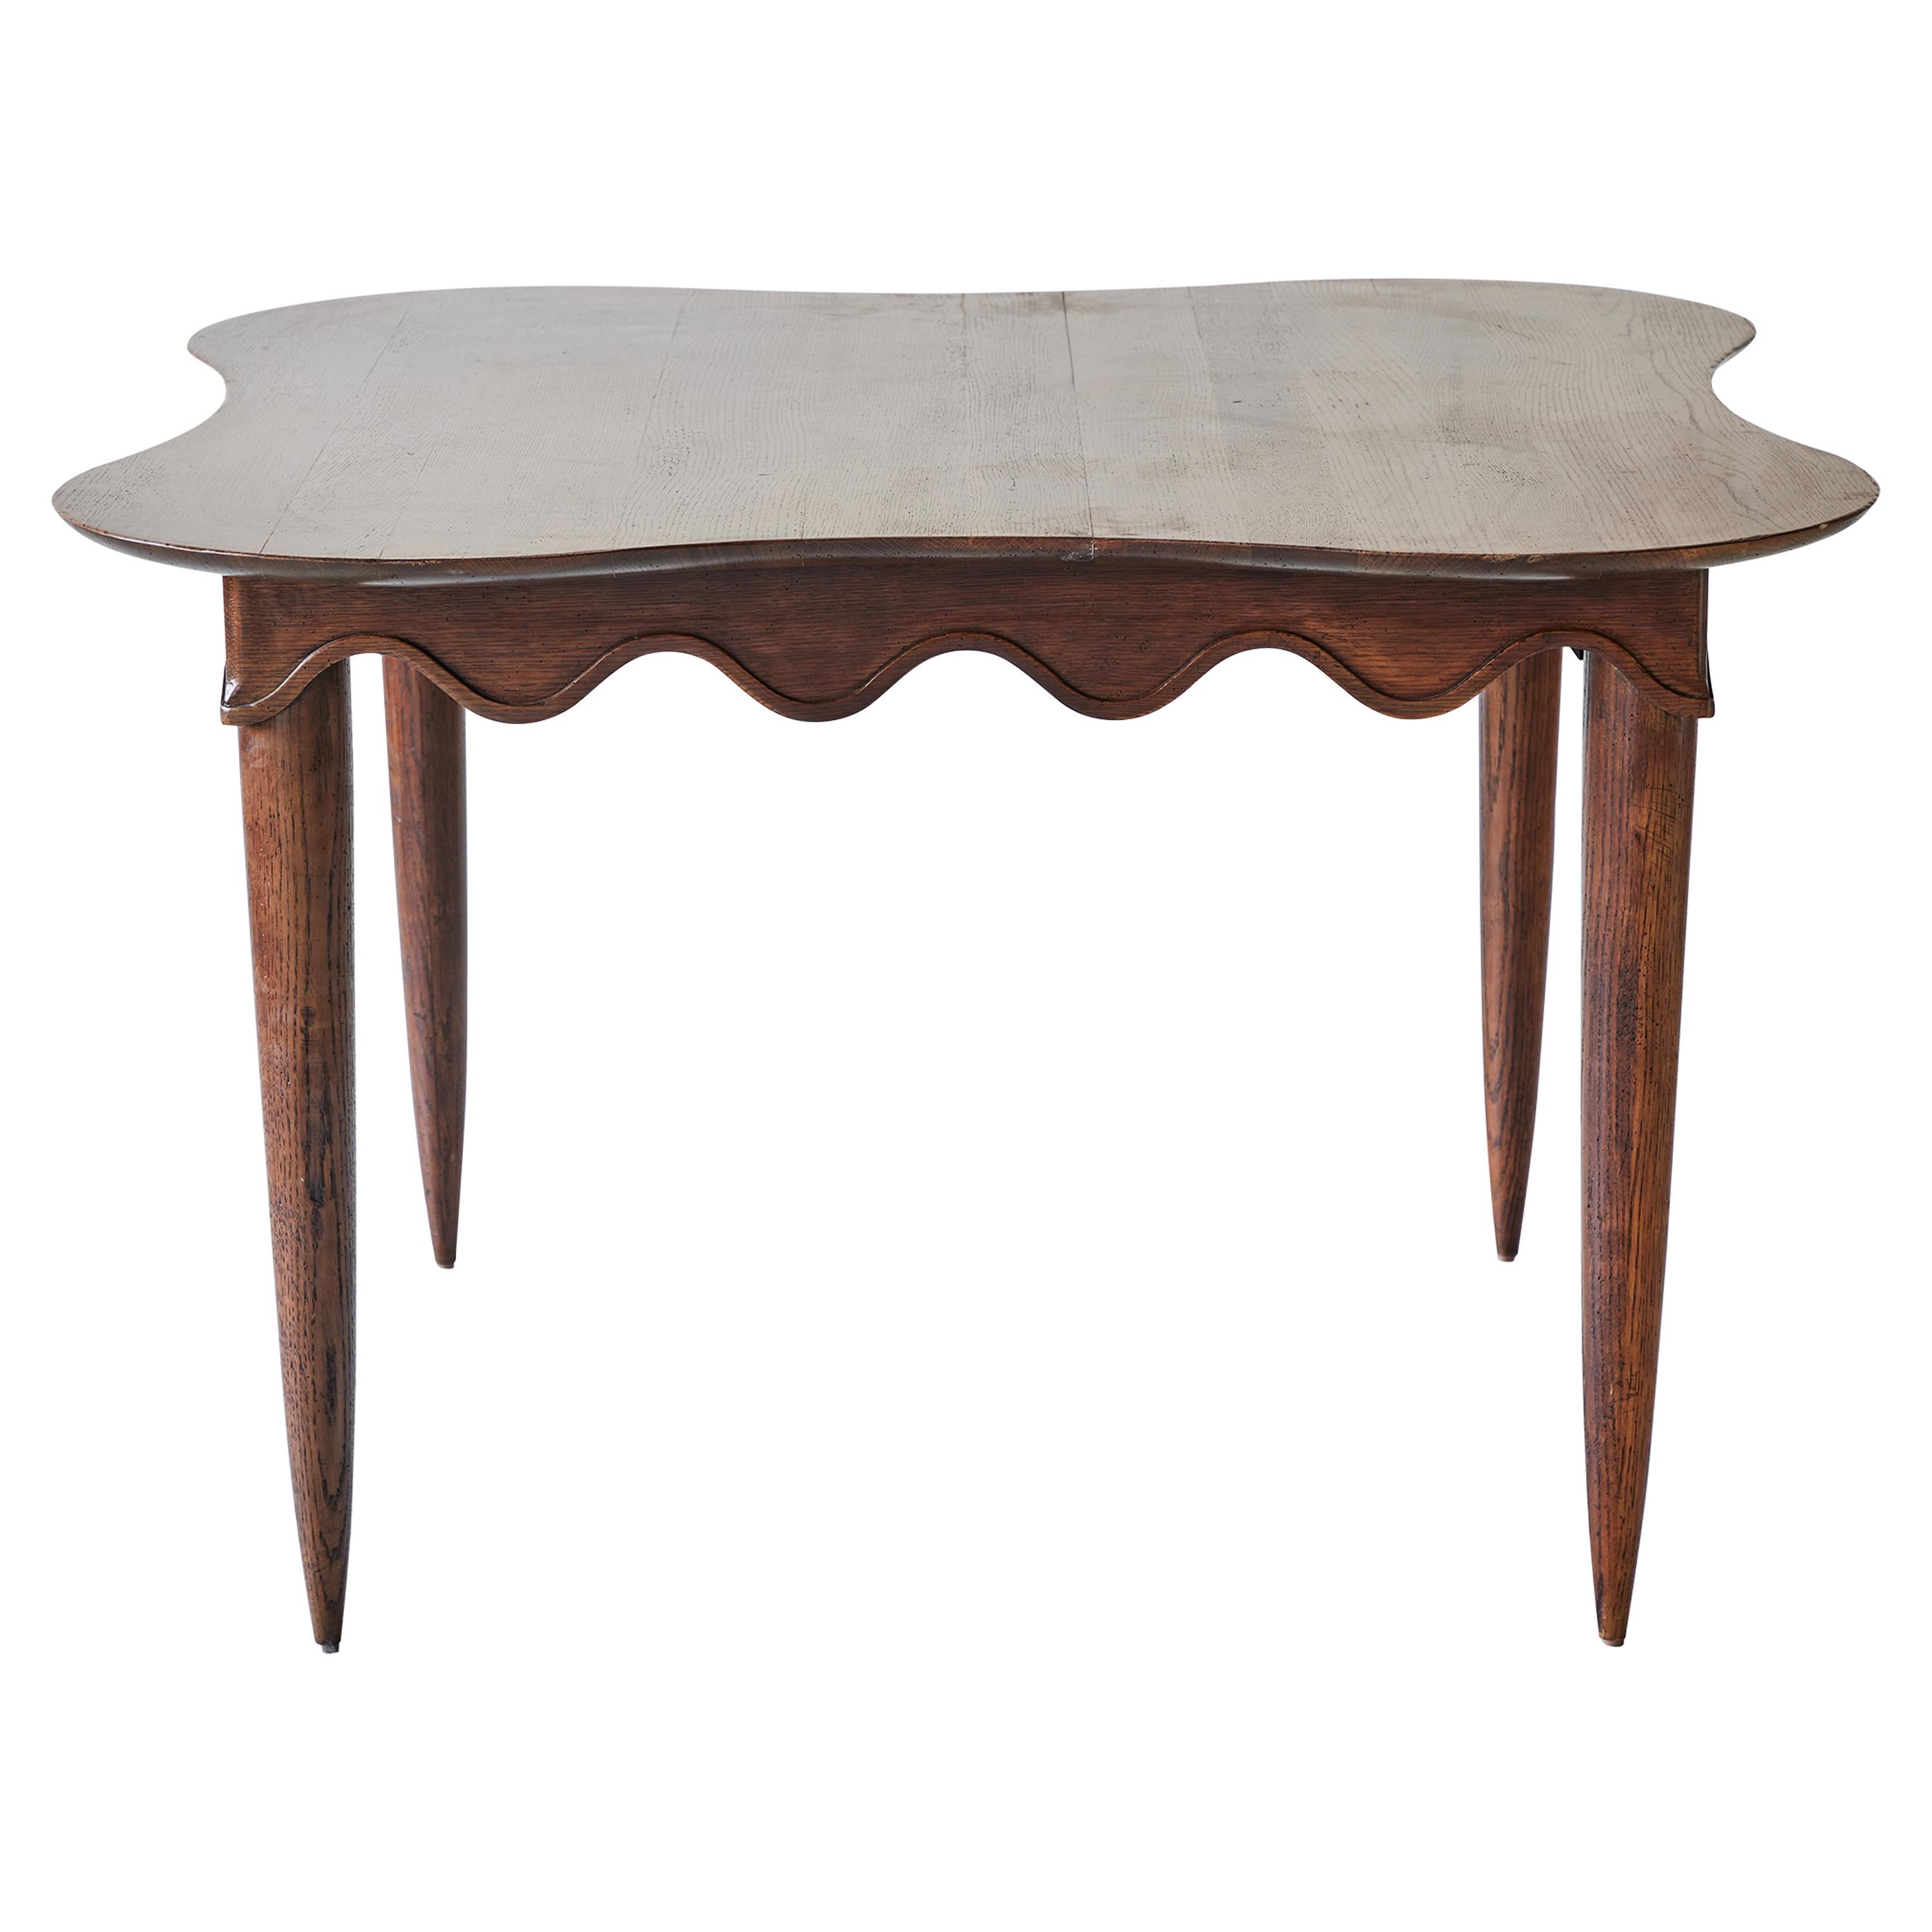 Midcentury Dining Table with Scalloped Apron